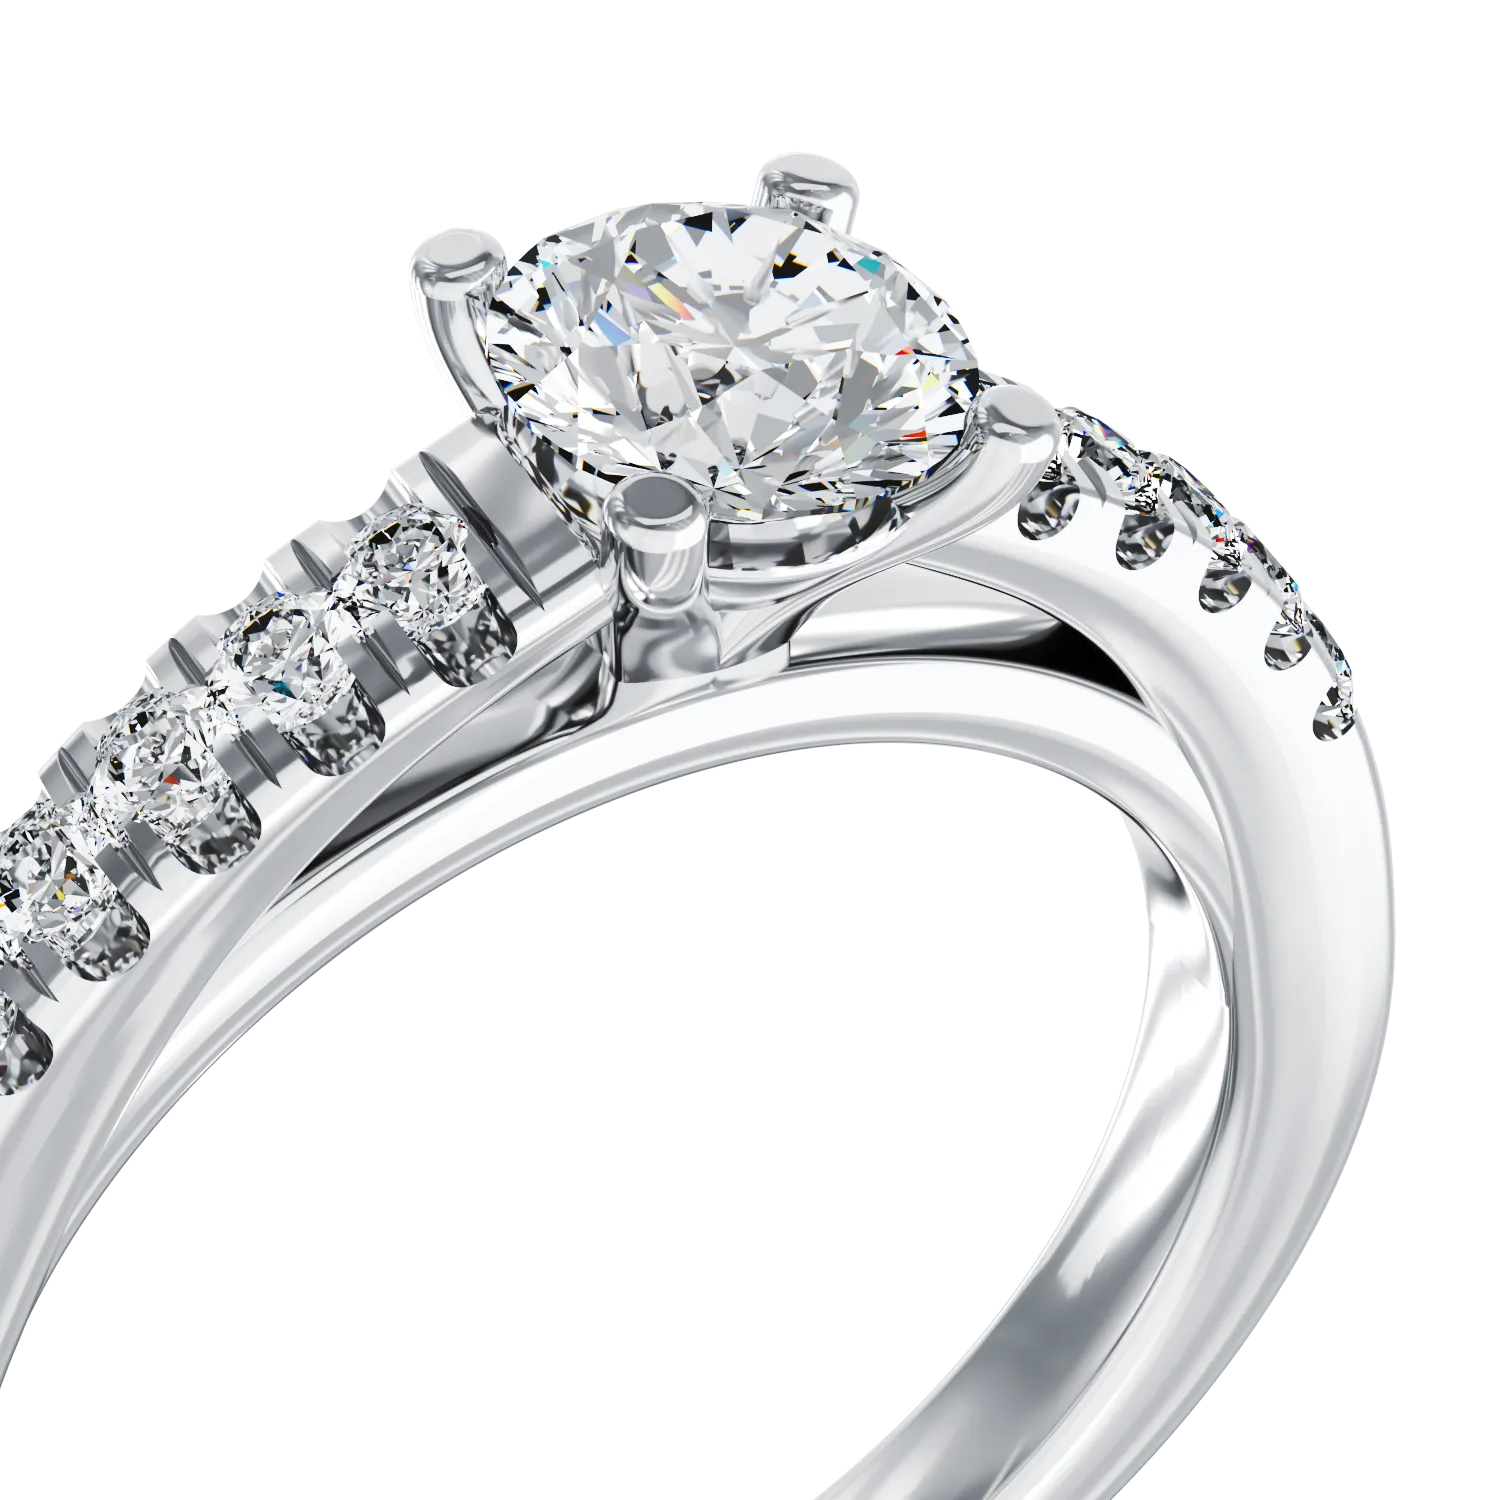 18K white gold engagement ring with 0.4ct diamond and 0.13ct diamonds